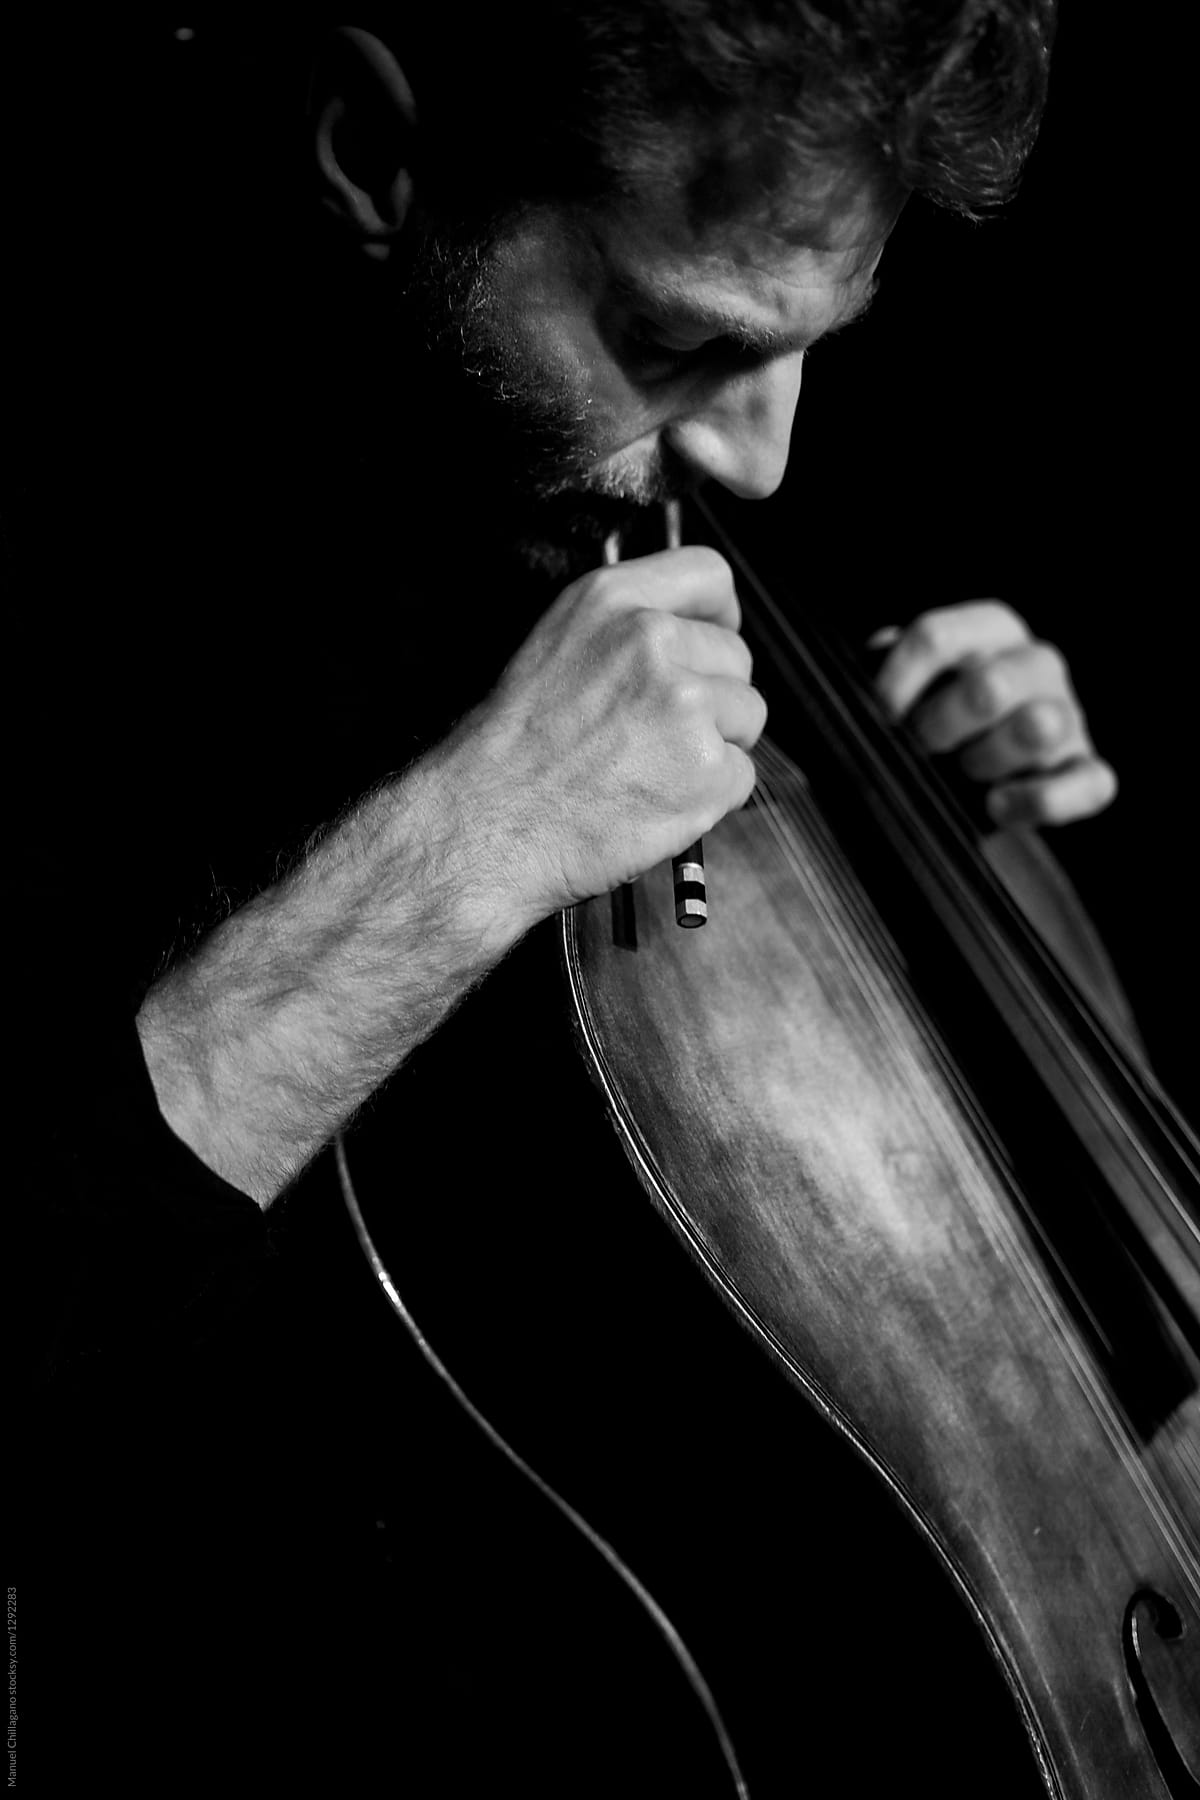 Black and White portrait of a cellist carefully playing his instrument